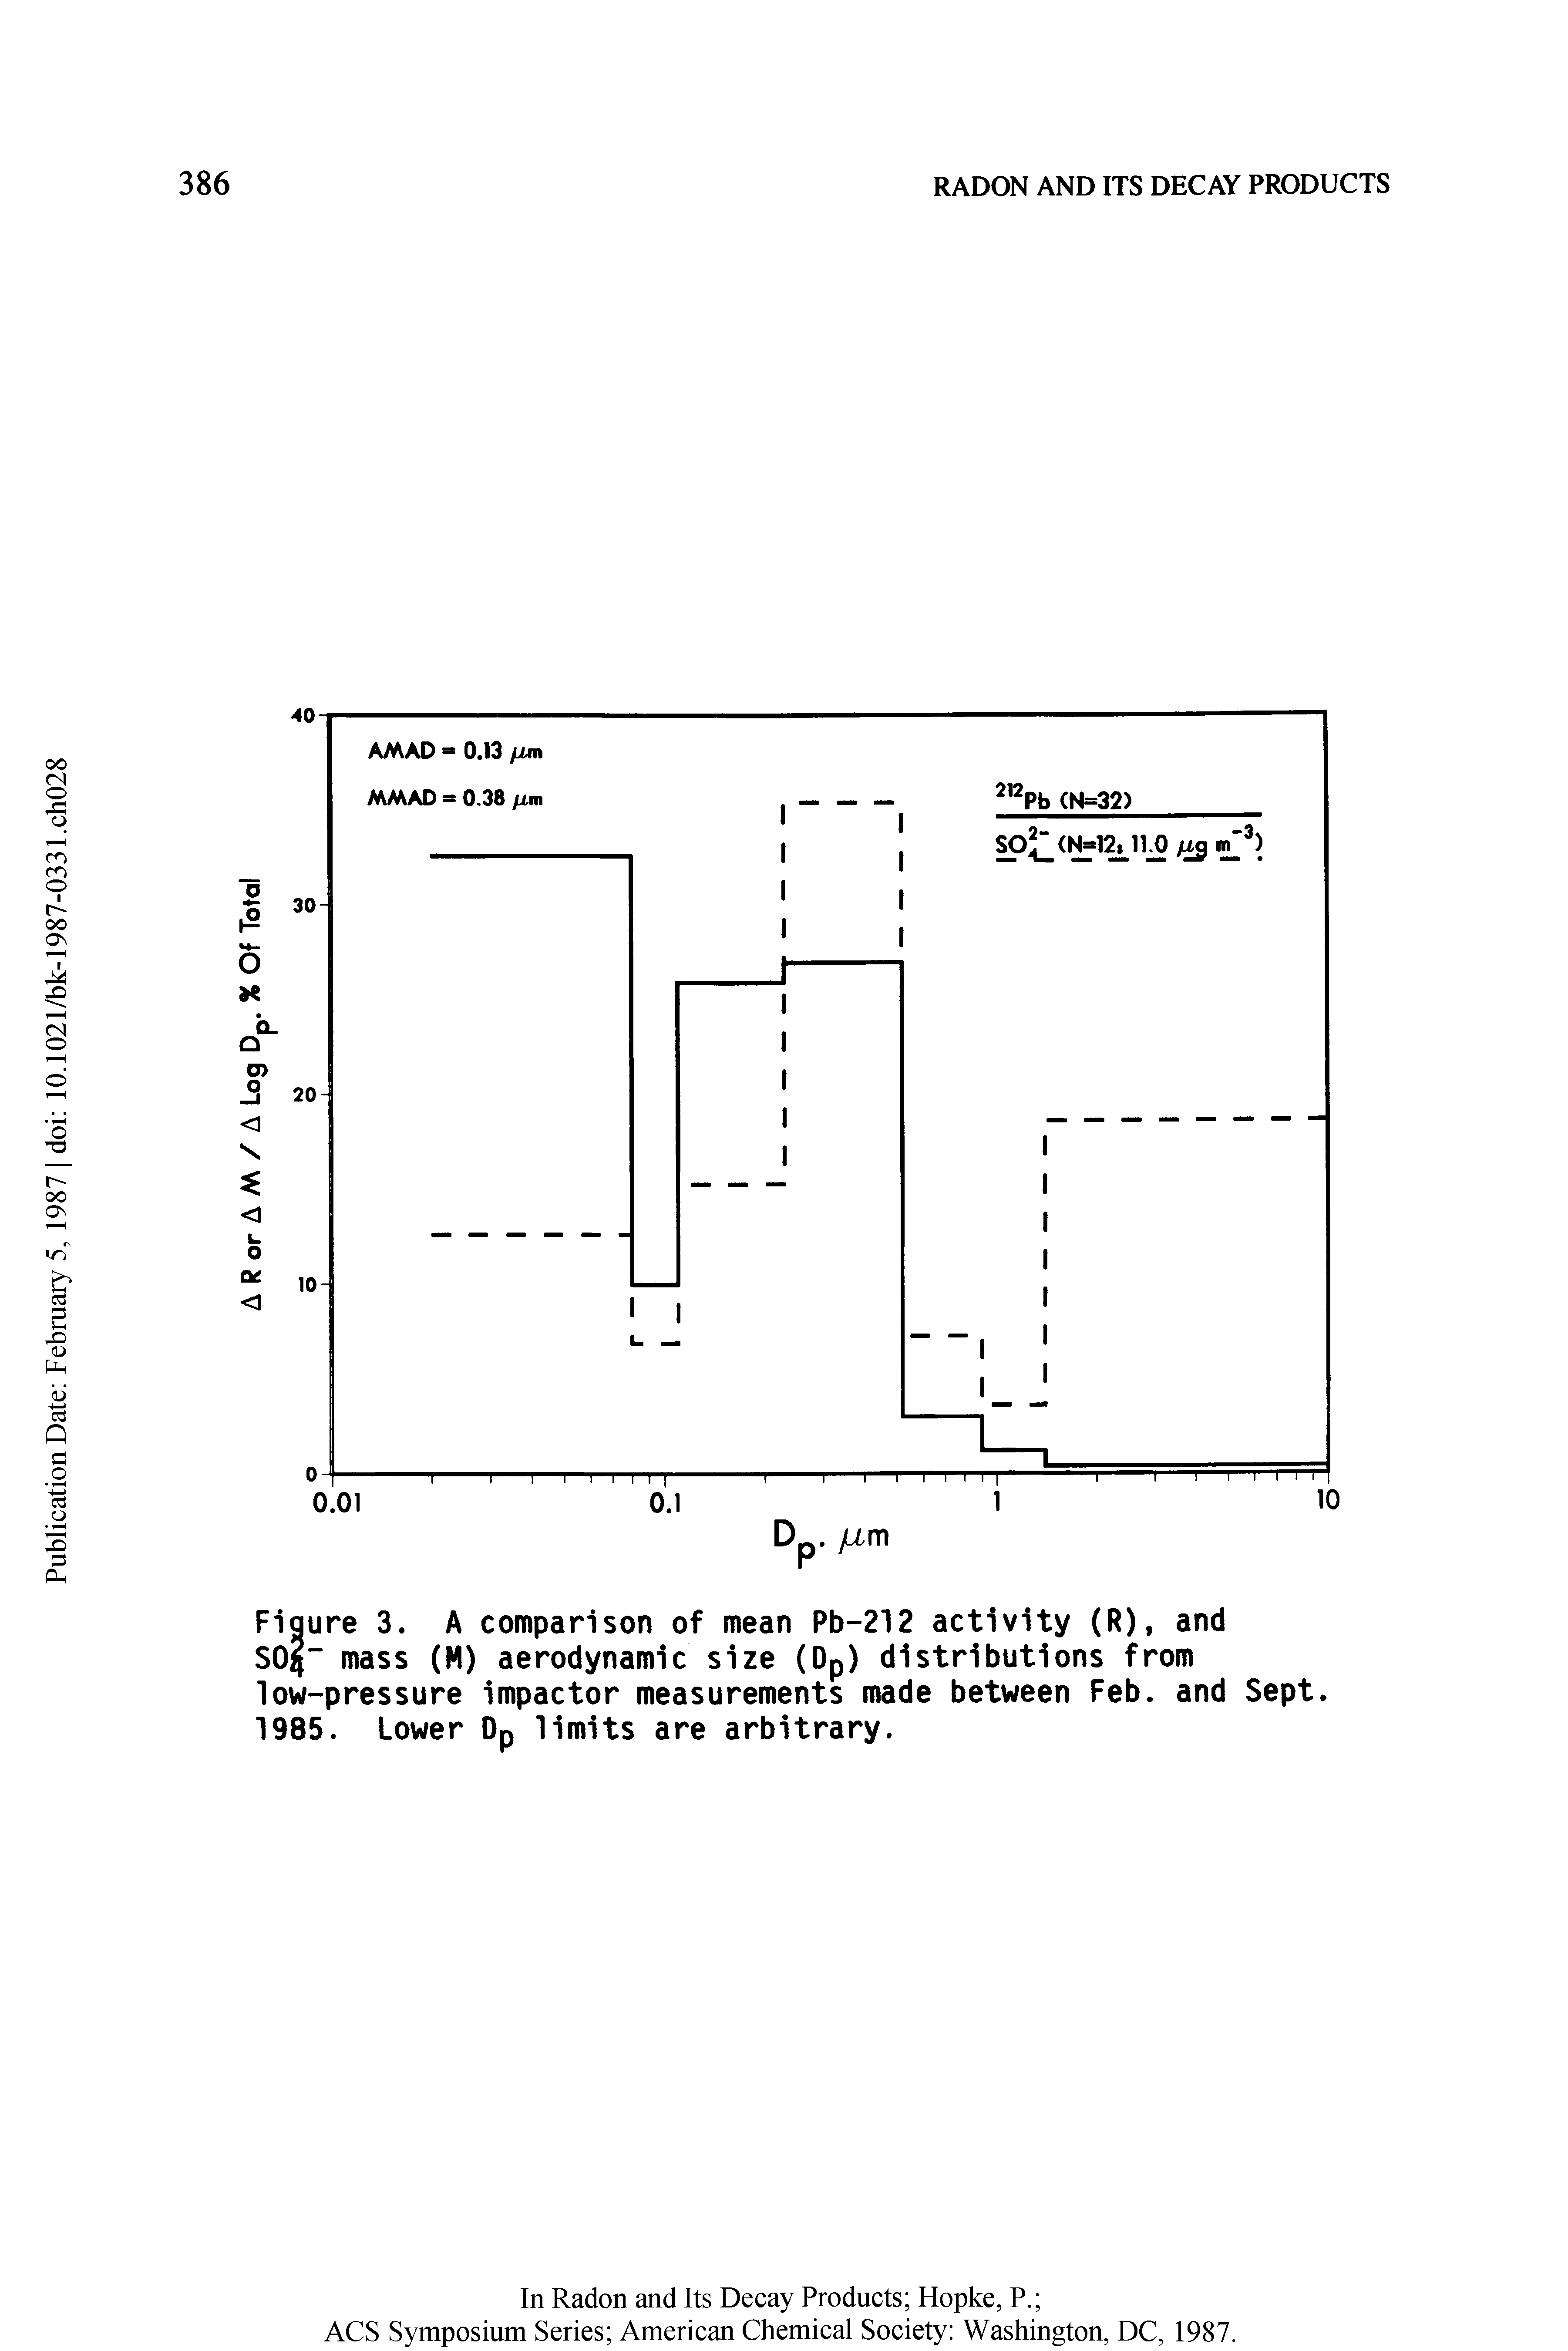 Figure 3. A comparison of mean Pb-212 activity (R), and SO4" mass (M) aerodynamic size (Dp) distributions from low-pressure impactor measurements made between Feb. and Sept. 1985. Lower Dp limits are arbitrary.